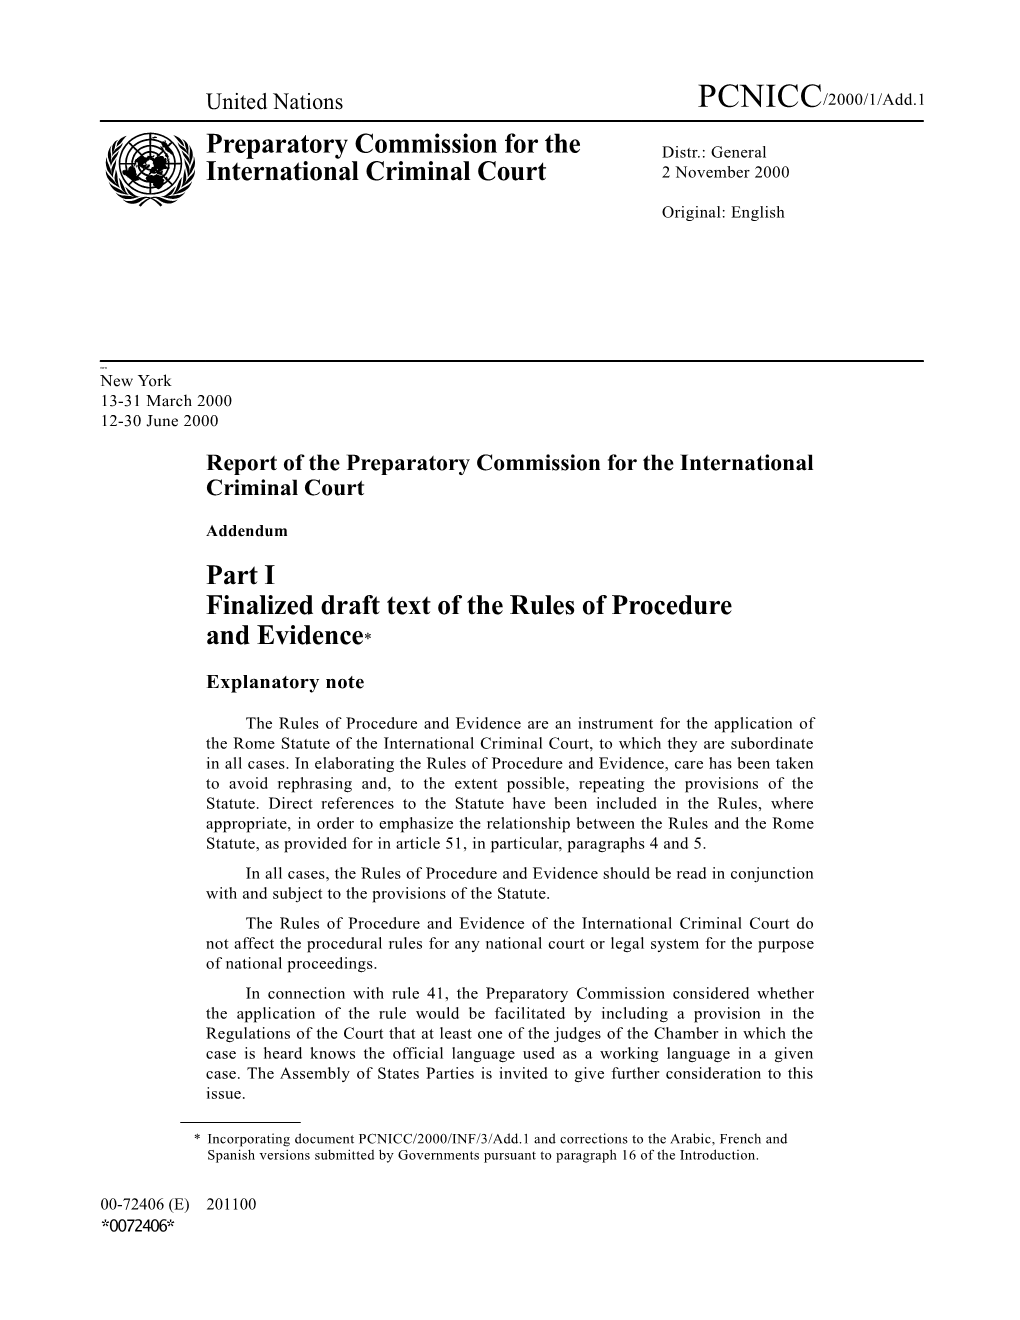 Report of the Preparatory Commission for the International Criminal Court